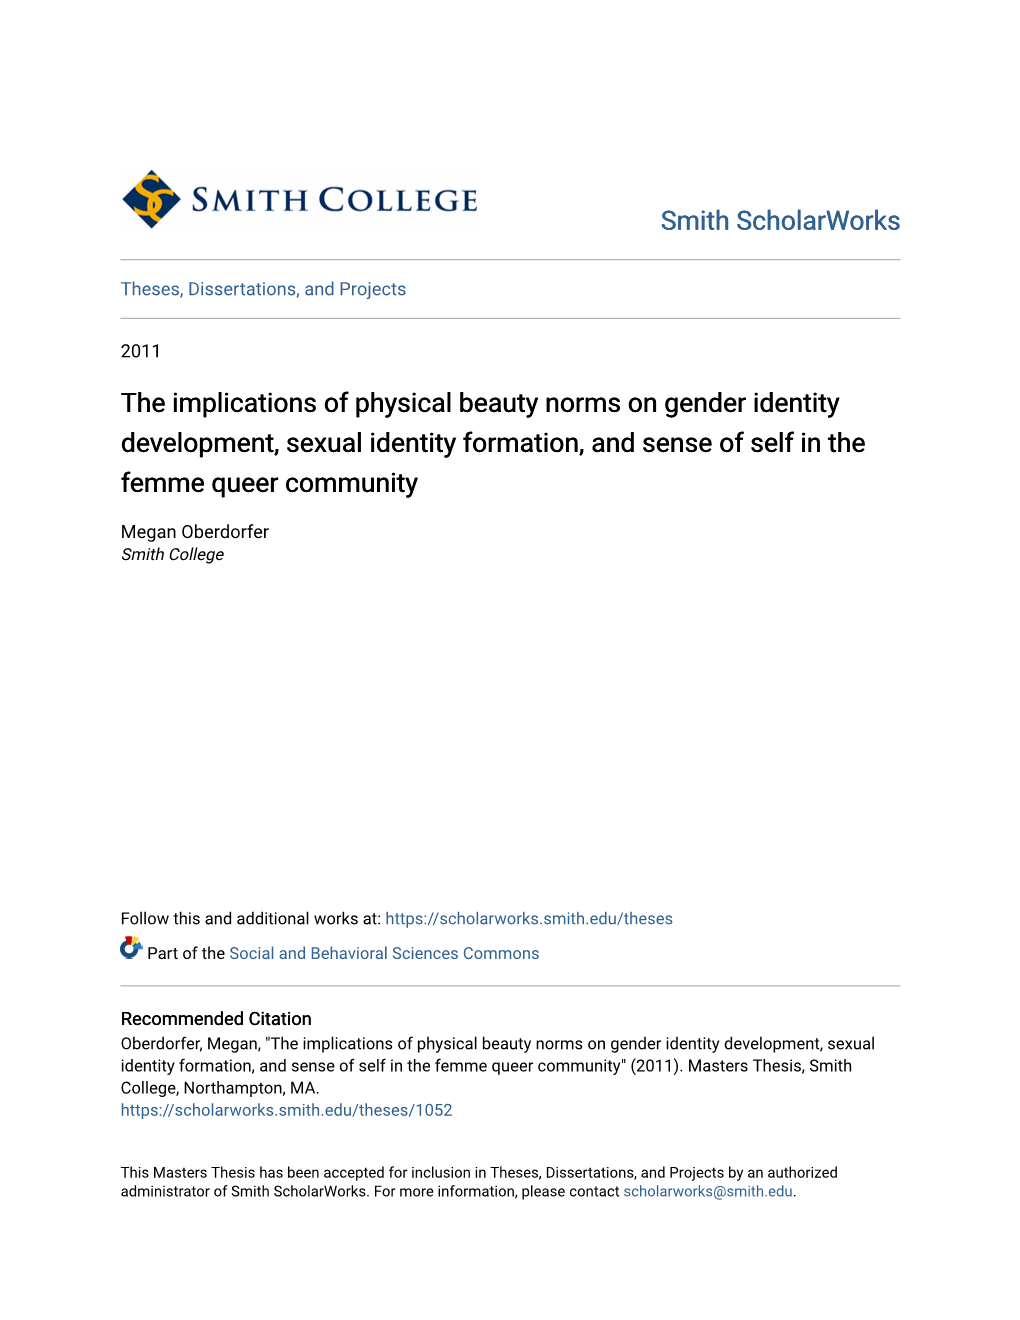 The Implications of Physical Beauty Norms on Gender Identity Development, Sexual Identity Formation, and Sense of Self in the Femme Queer Community